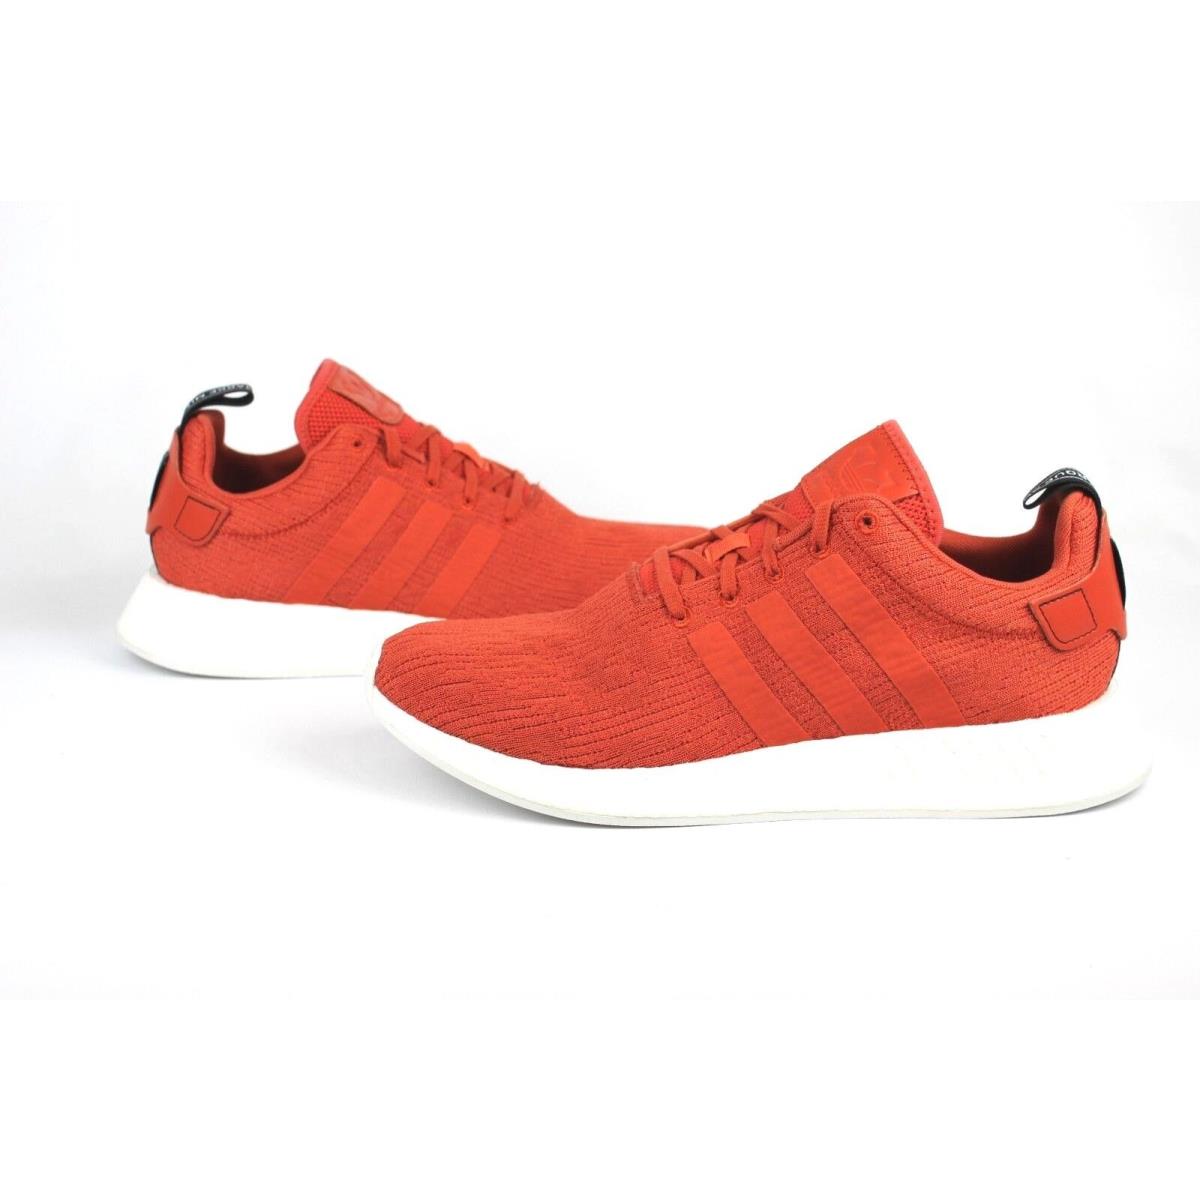 Adidas shoes NMD - Red 1